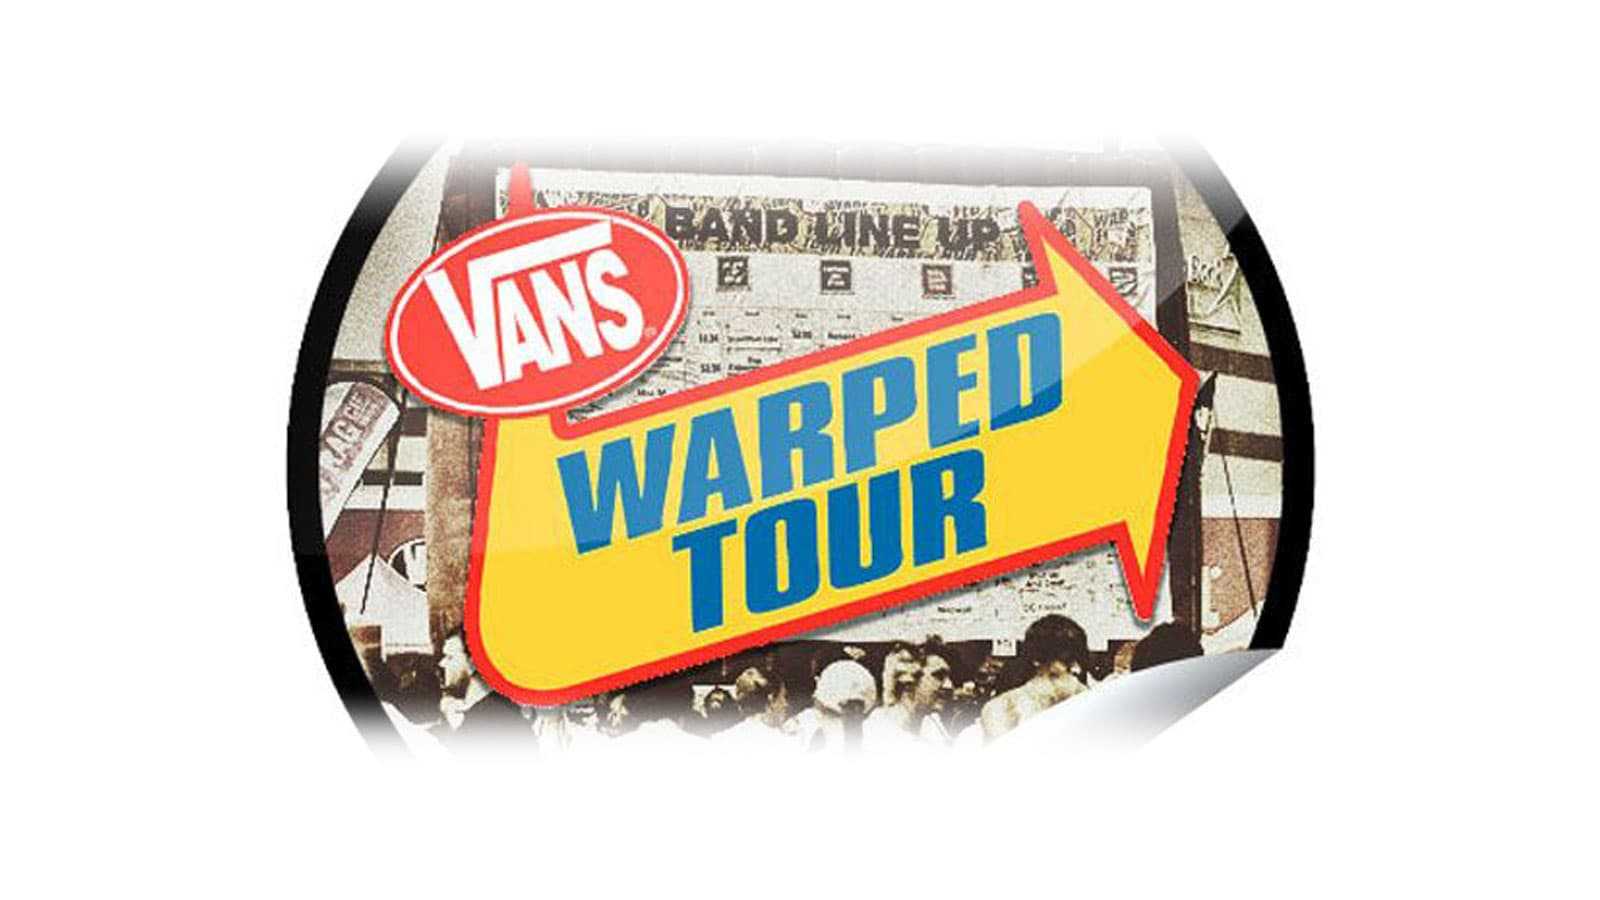 Full Sail to Present the Vans Warped Tour’s Acoustic Basement Stage - Hero image 